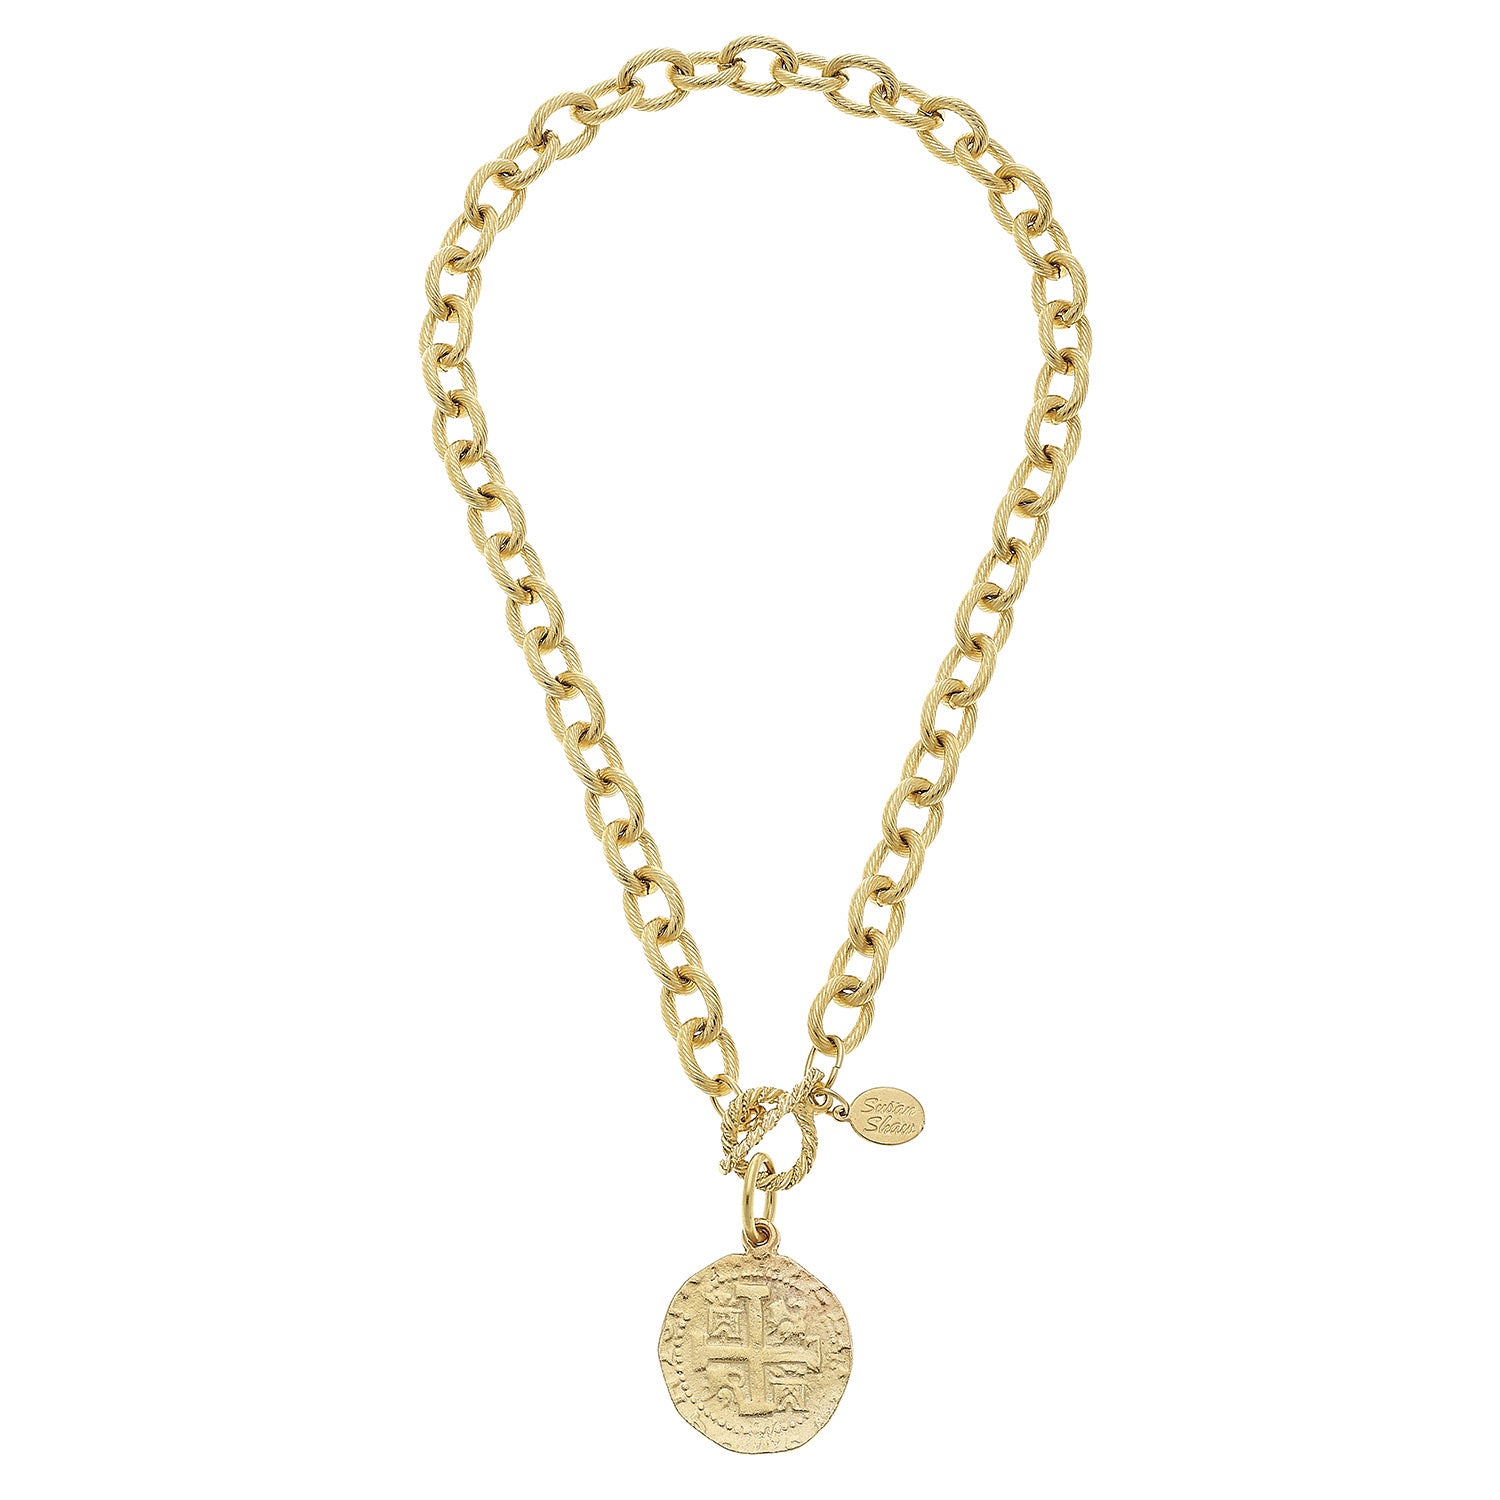 Susan Shaw Handcast Gold Coin Toggle Necklace